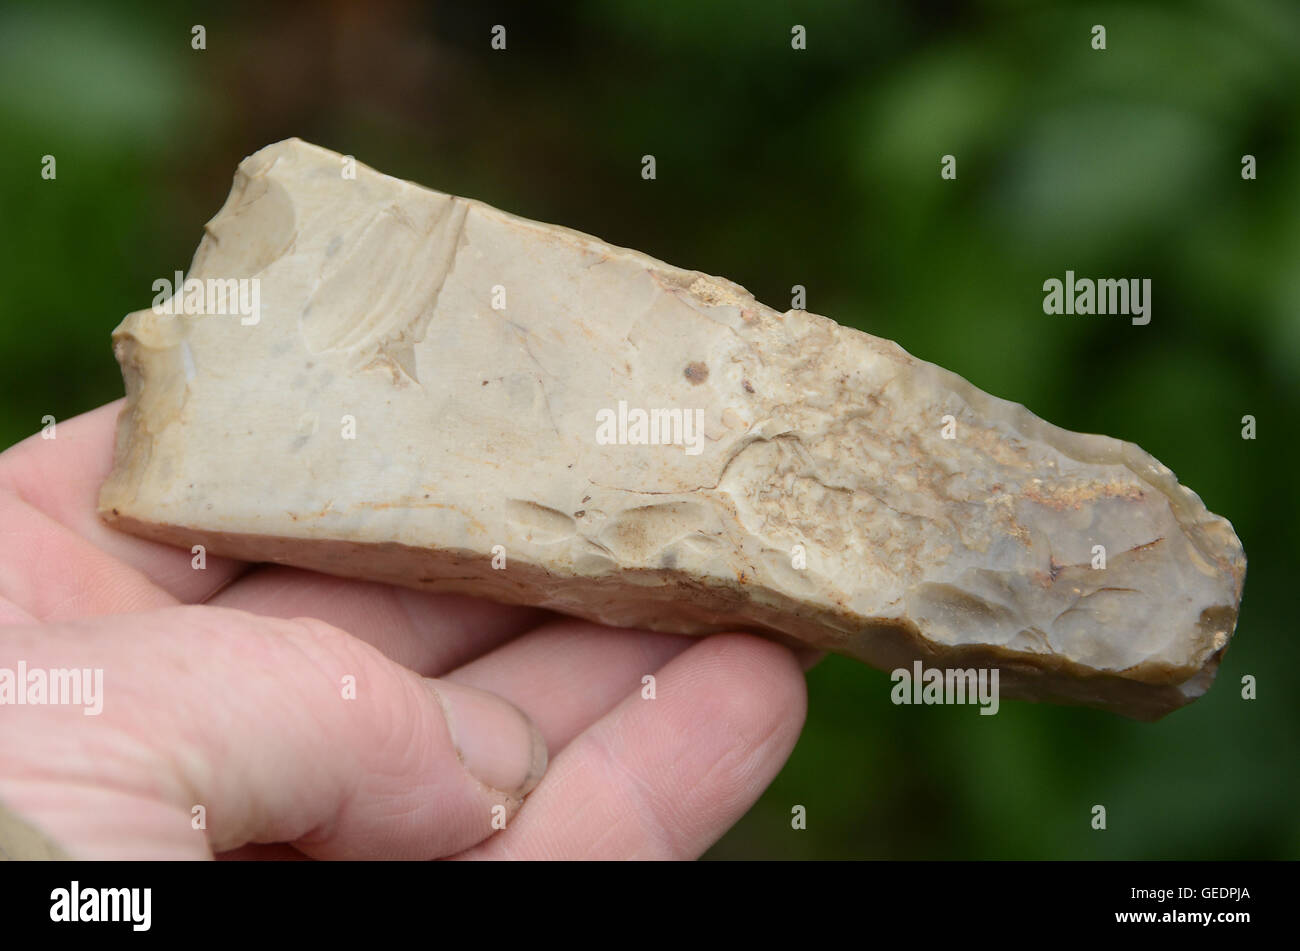 Stone age axe 'blade' held in a human hand. Stock Photo